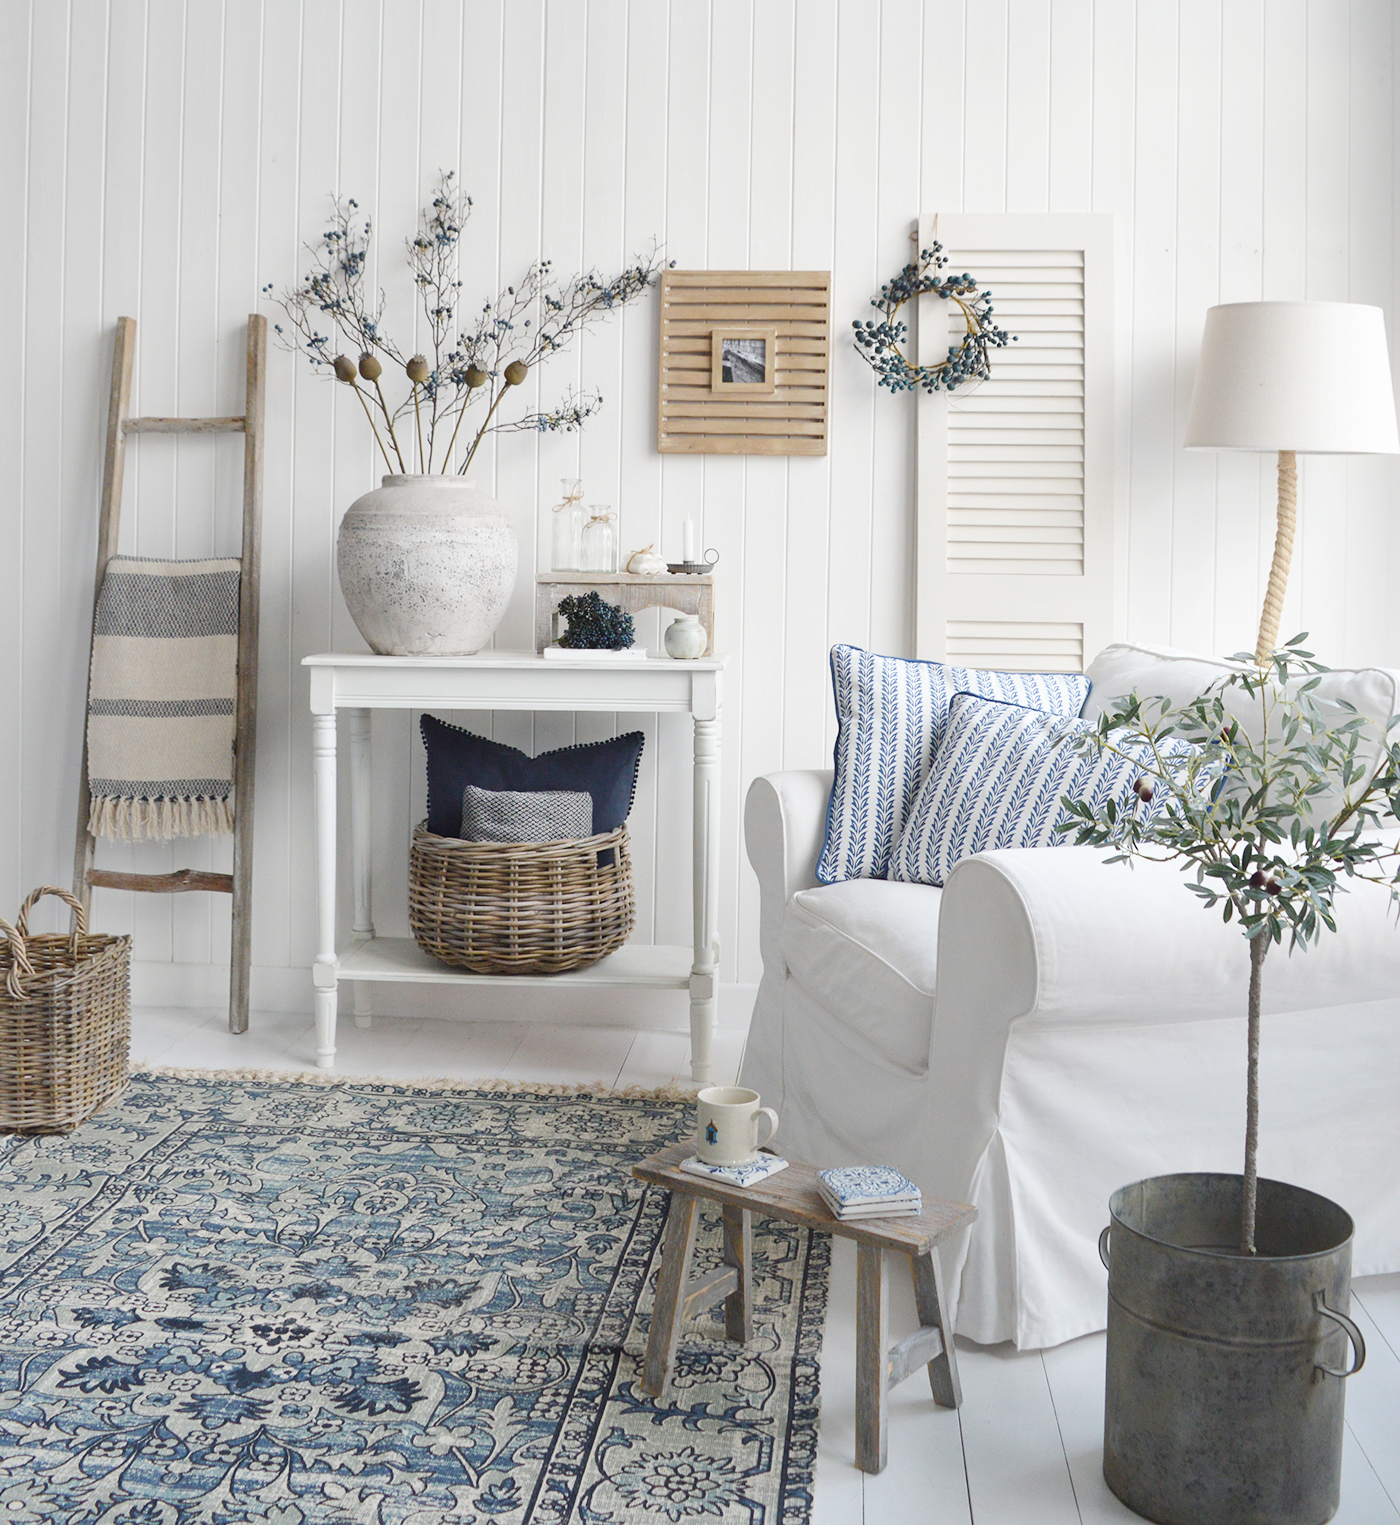 New England Living room furniture in whites and blues, for coatal, country and modern farmhouse furniture